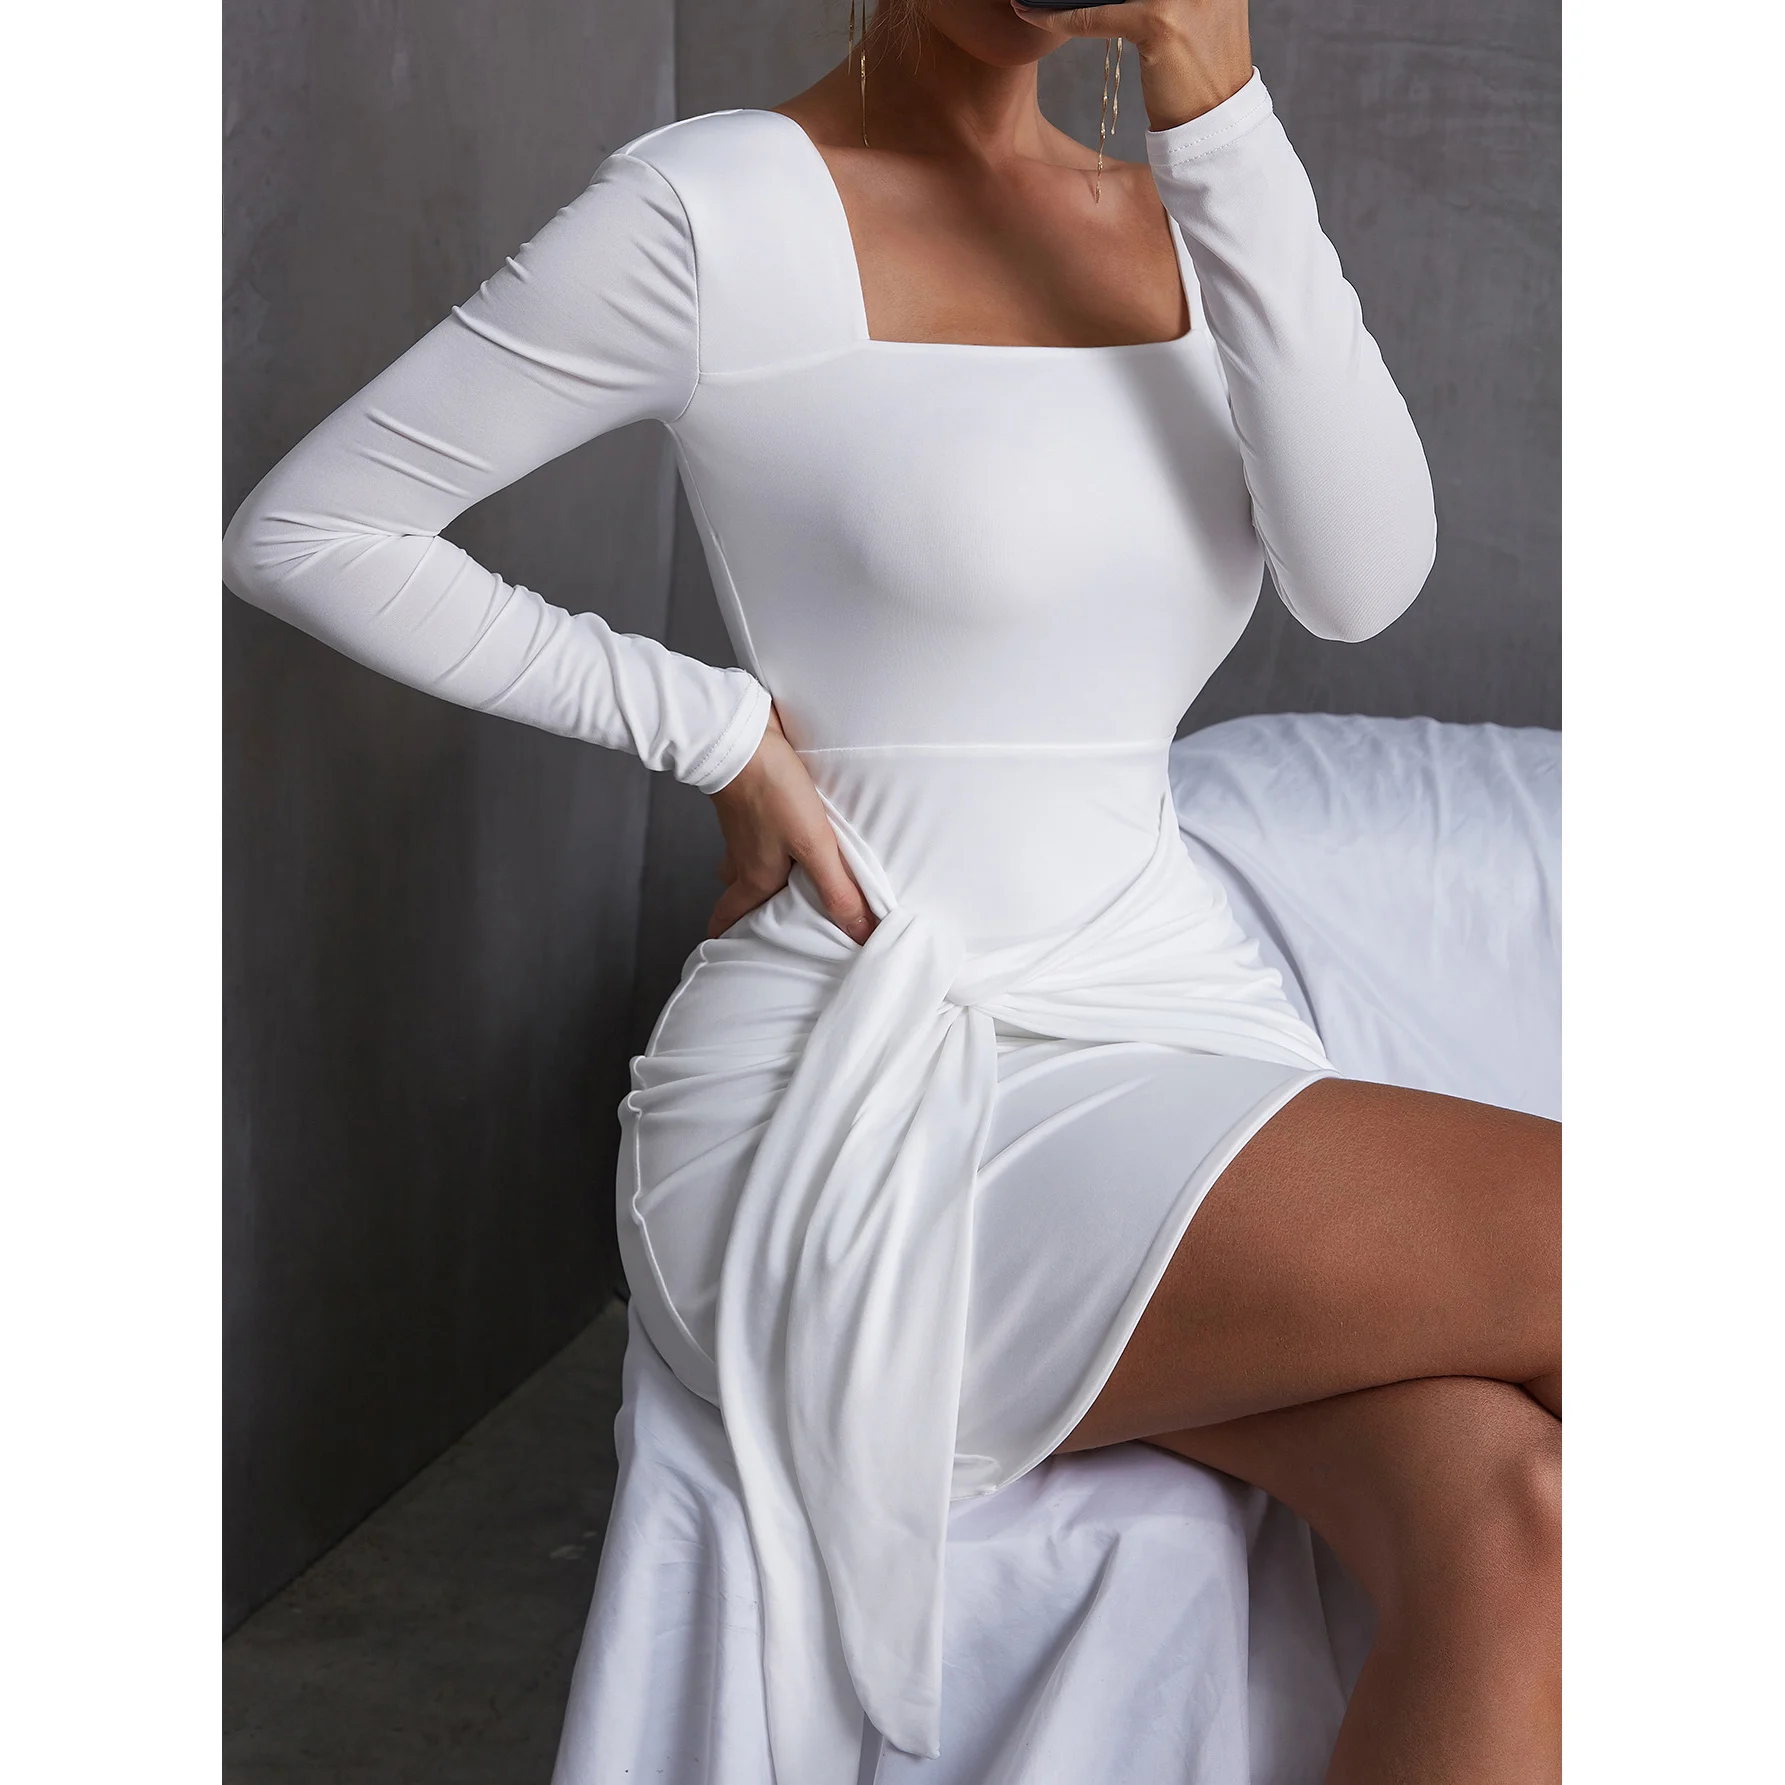 

Excellent quality plus size women dresses sexy style new elegant fashion casual daily life business clothing young lady dress, Picture shown